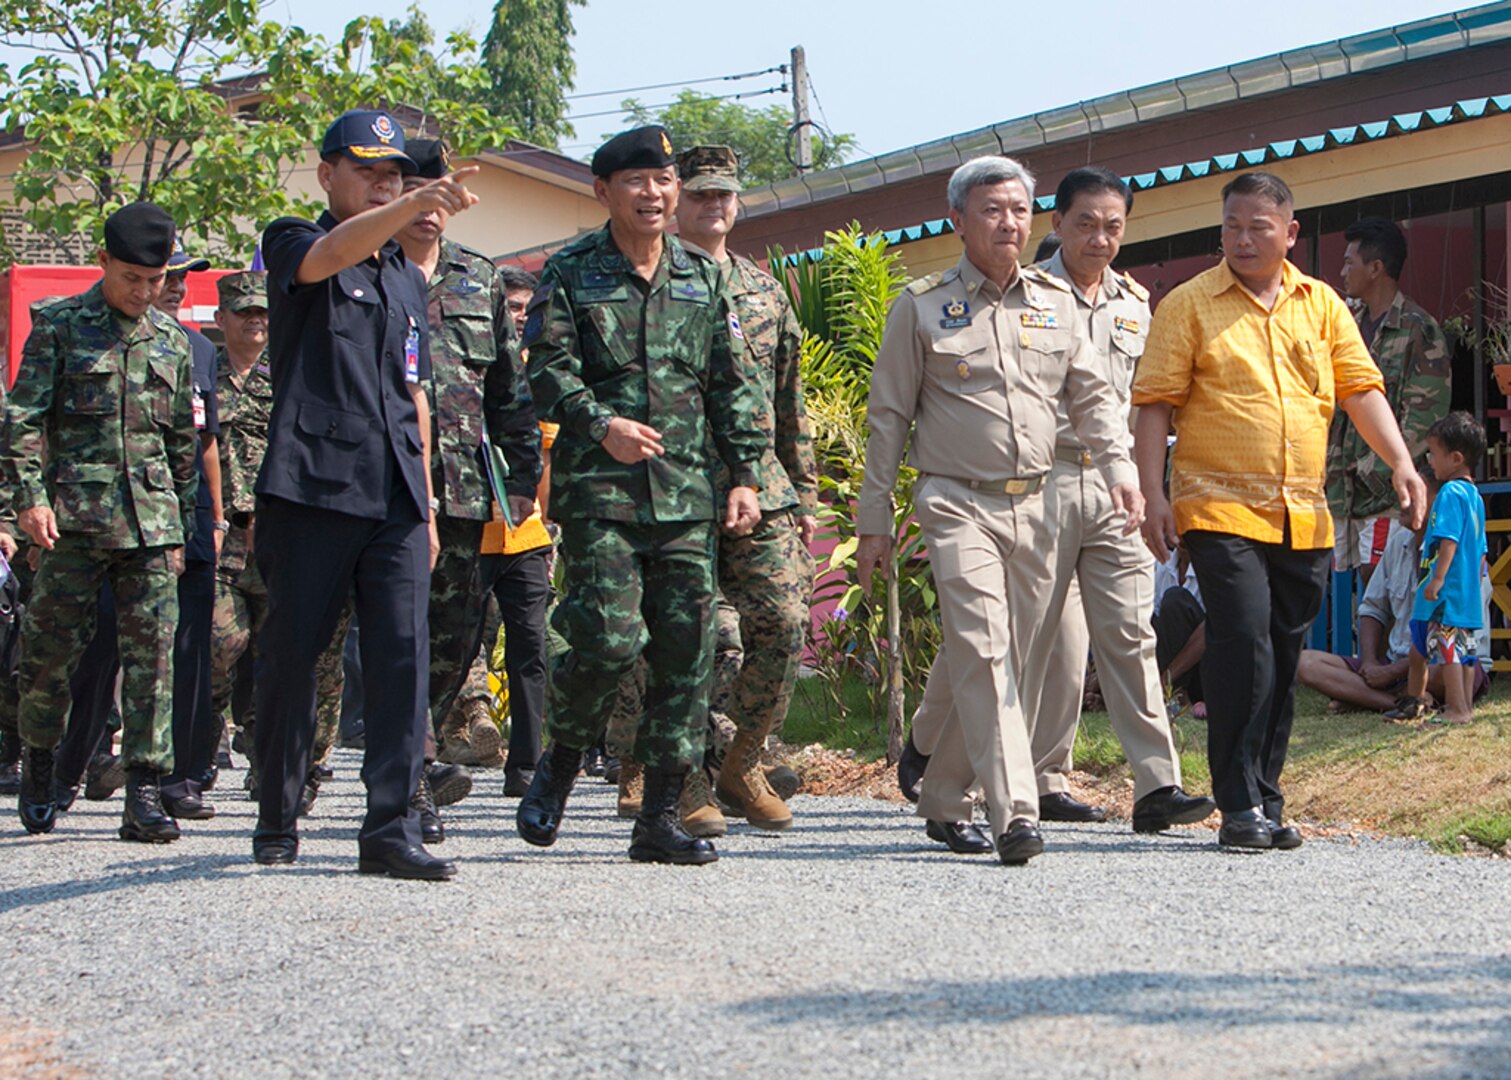 Distinguished visitors walk to the reviewing area to begin the dedication ceremony of a one-room multi-purpose educational building Feb. 18 at Ban Sa Yai, Trat, Thailand. The construction at Ban Sa Yai was one of six humanitarian civic action sites in which the Thai, U.S. and partner nation’s militaries will worked together on civic programs during Cobra Gold 2016. The HCA programs will help improve the quality of life, as well as the general health and welfare of civilian residents in the exercise areas.  